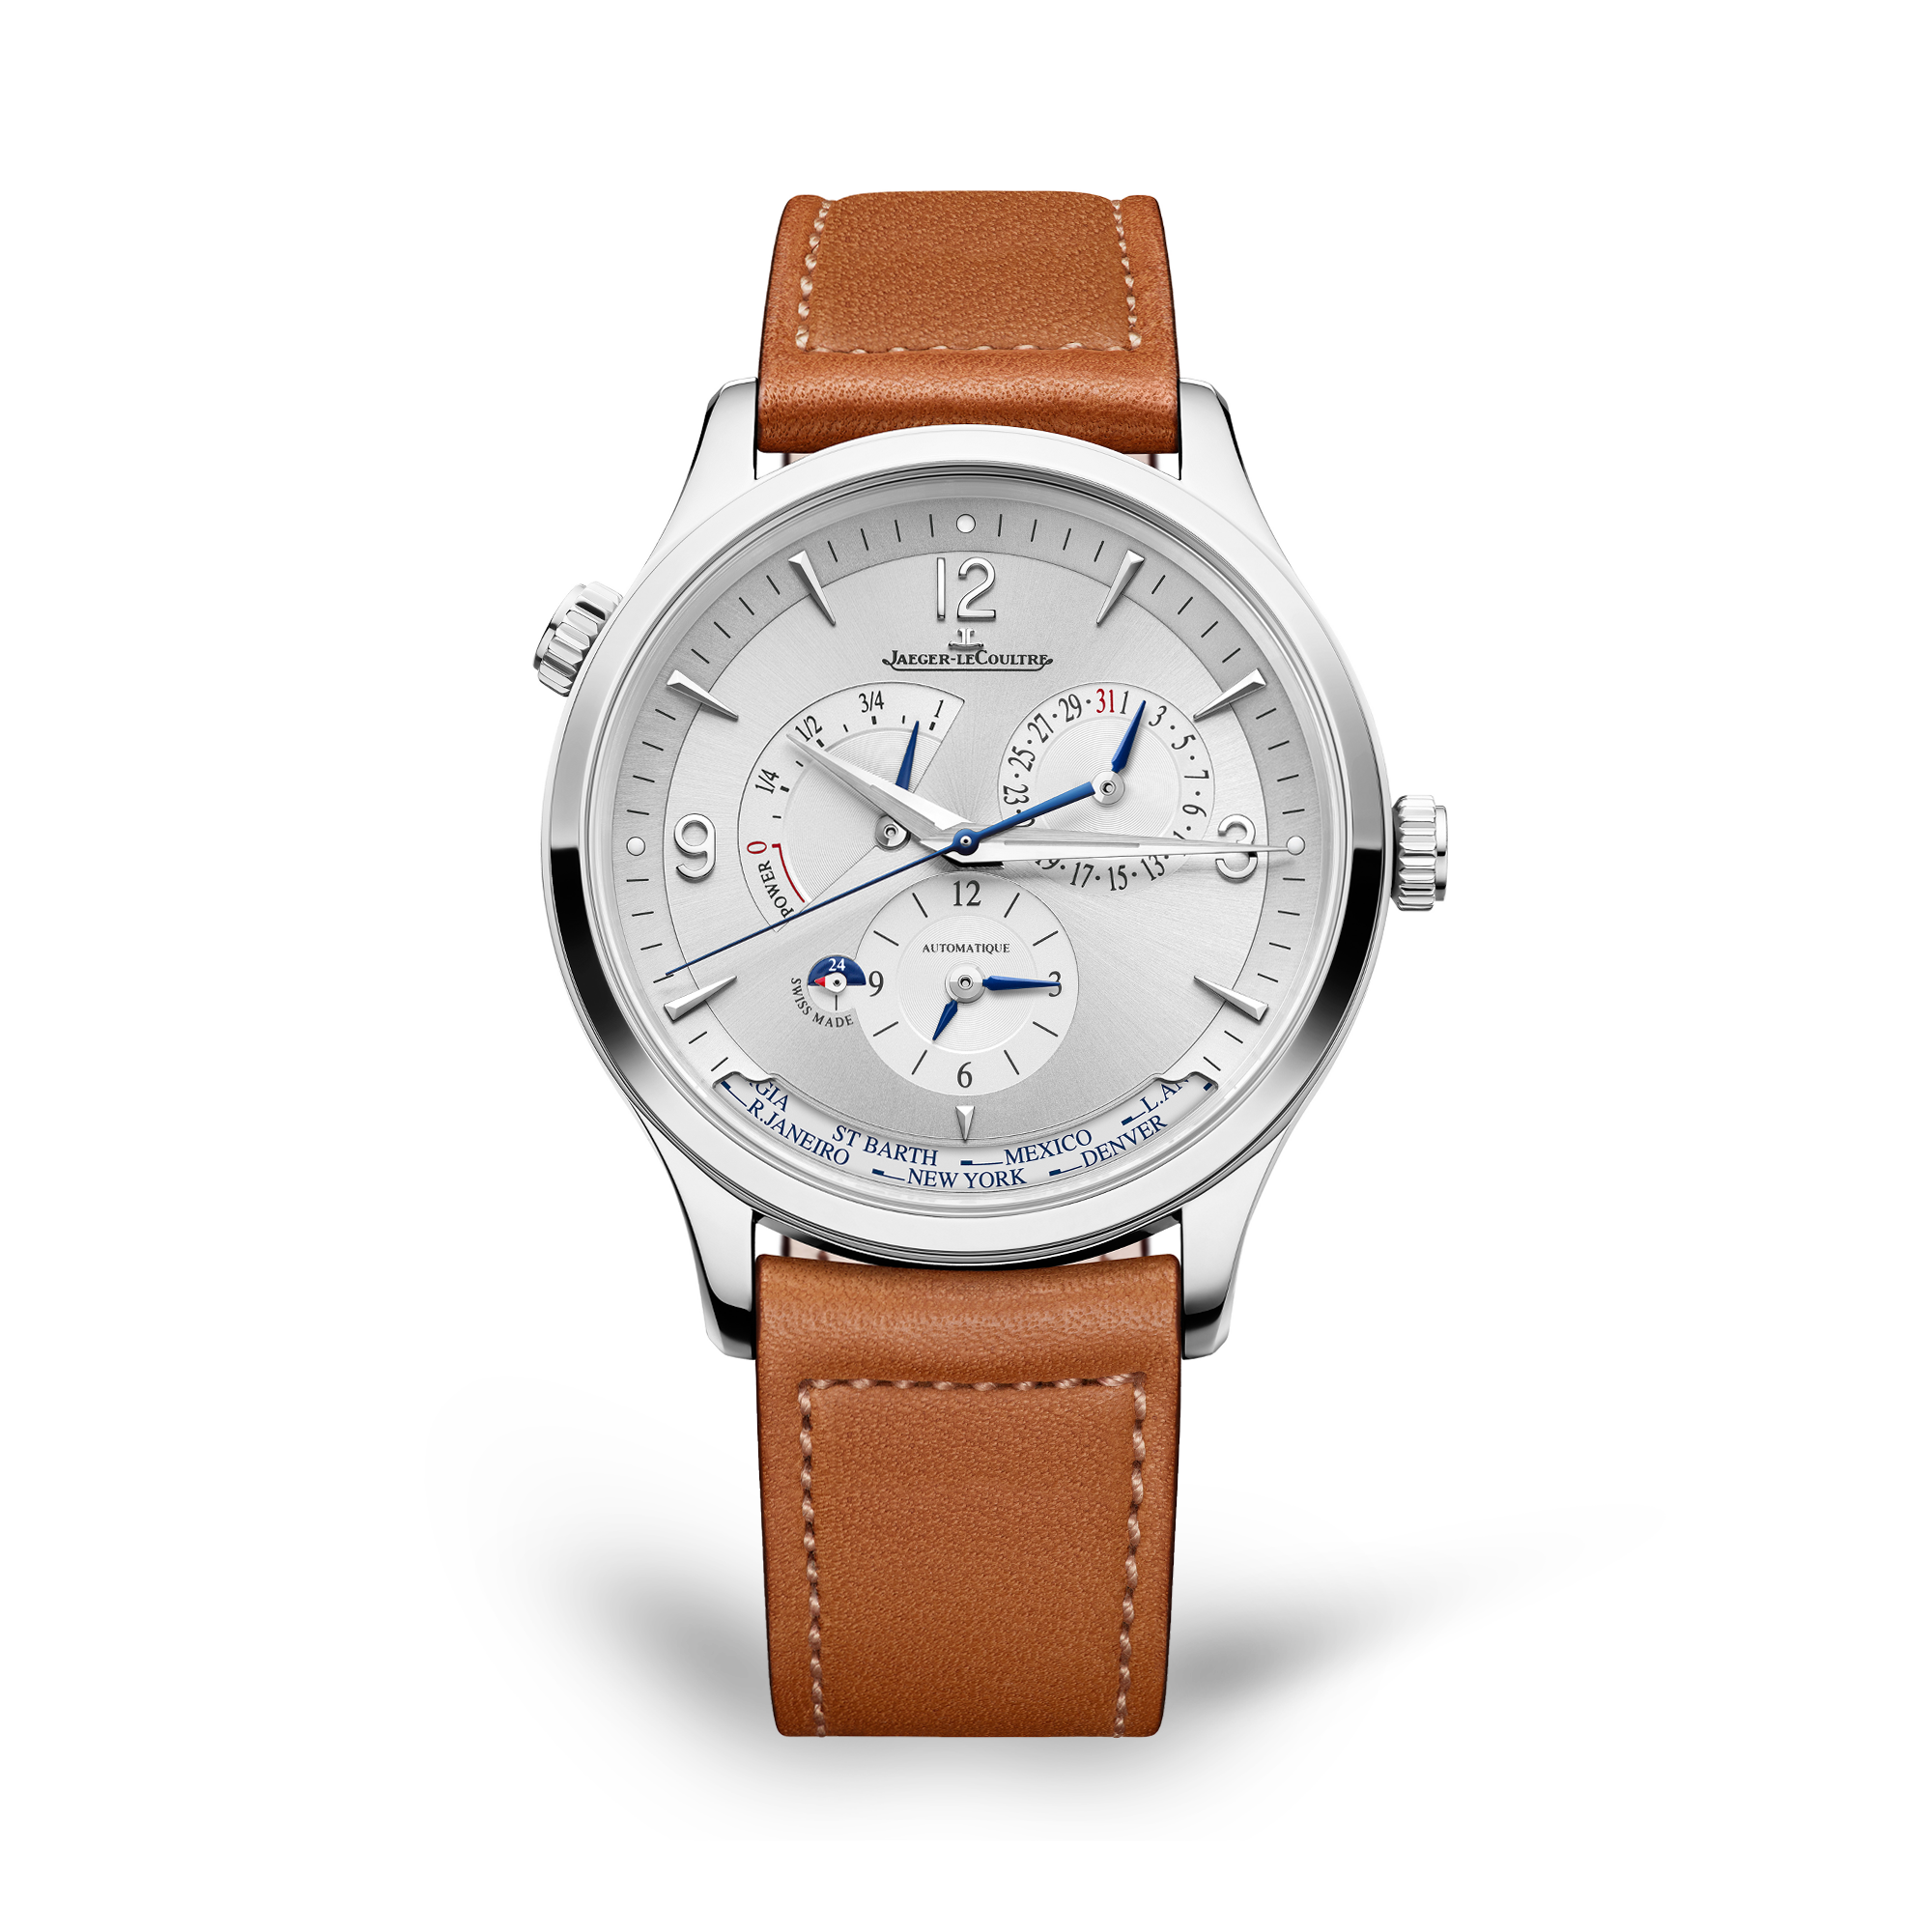 Jaeger-LeCoultre Master Control Geographic AC 39mm, Silver Dial, Baton Numerals_1